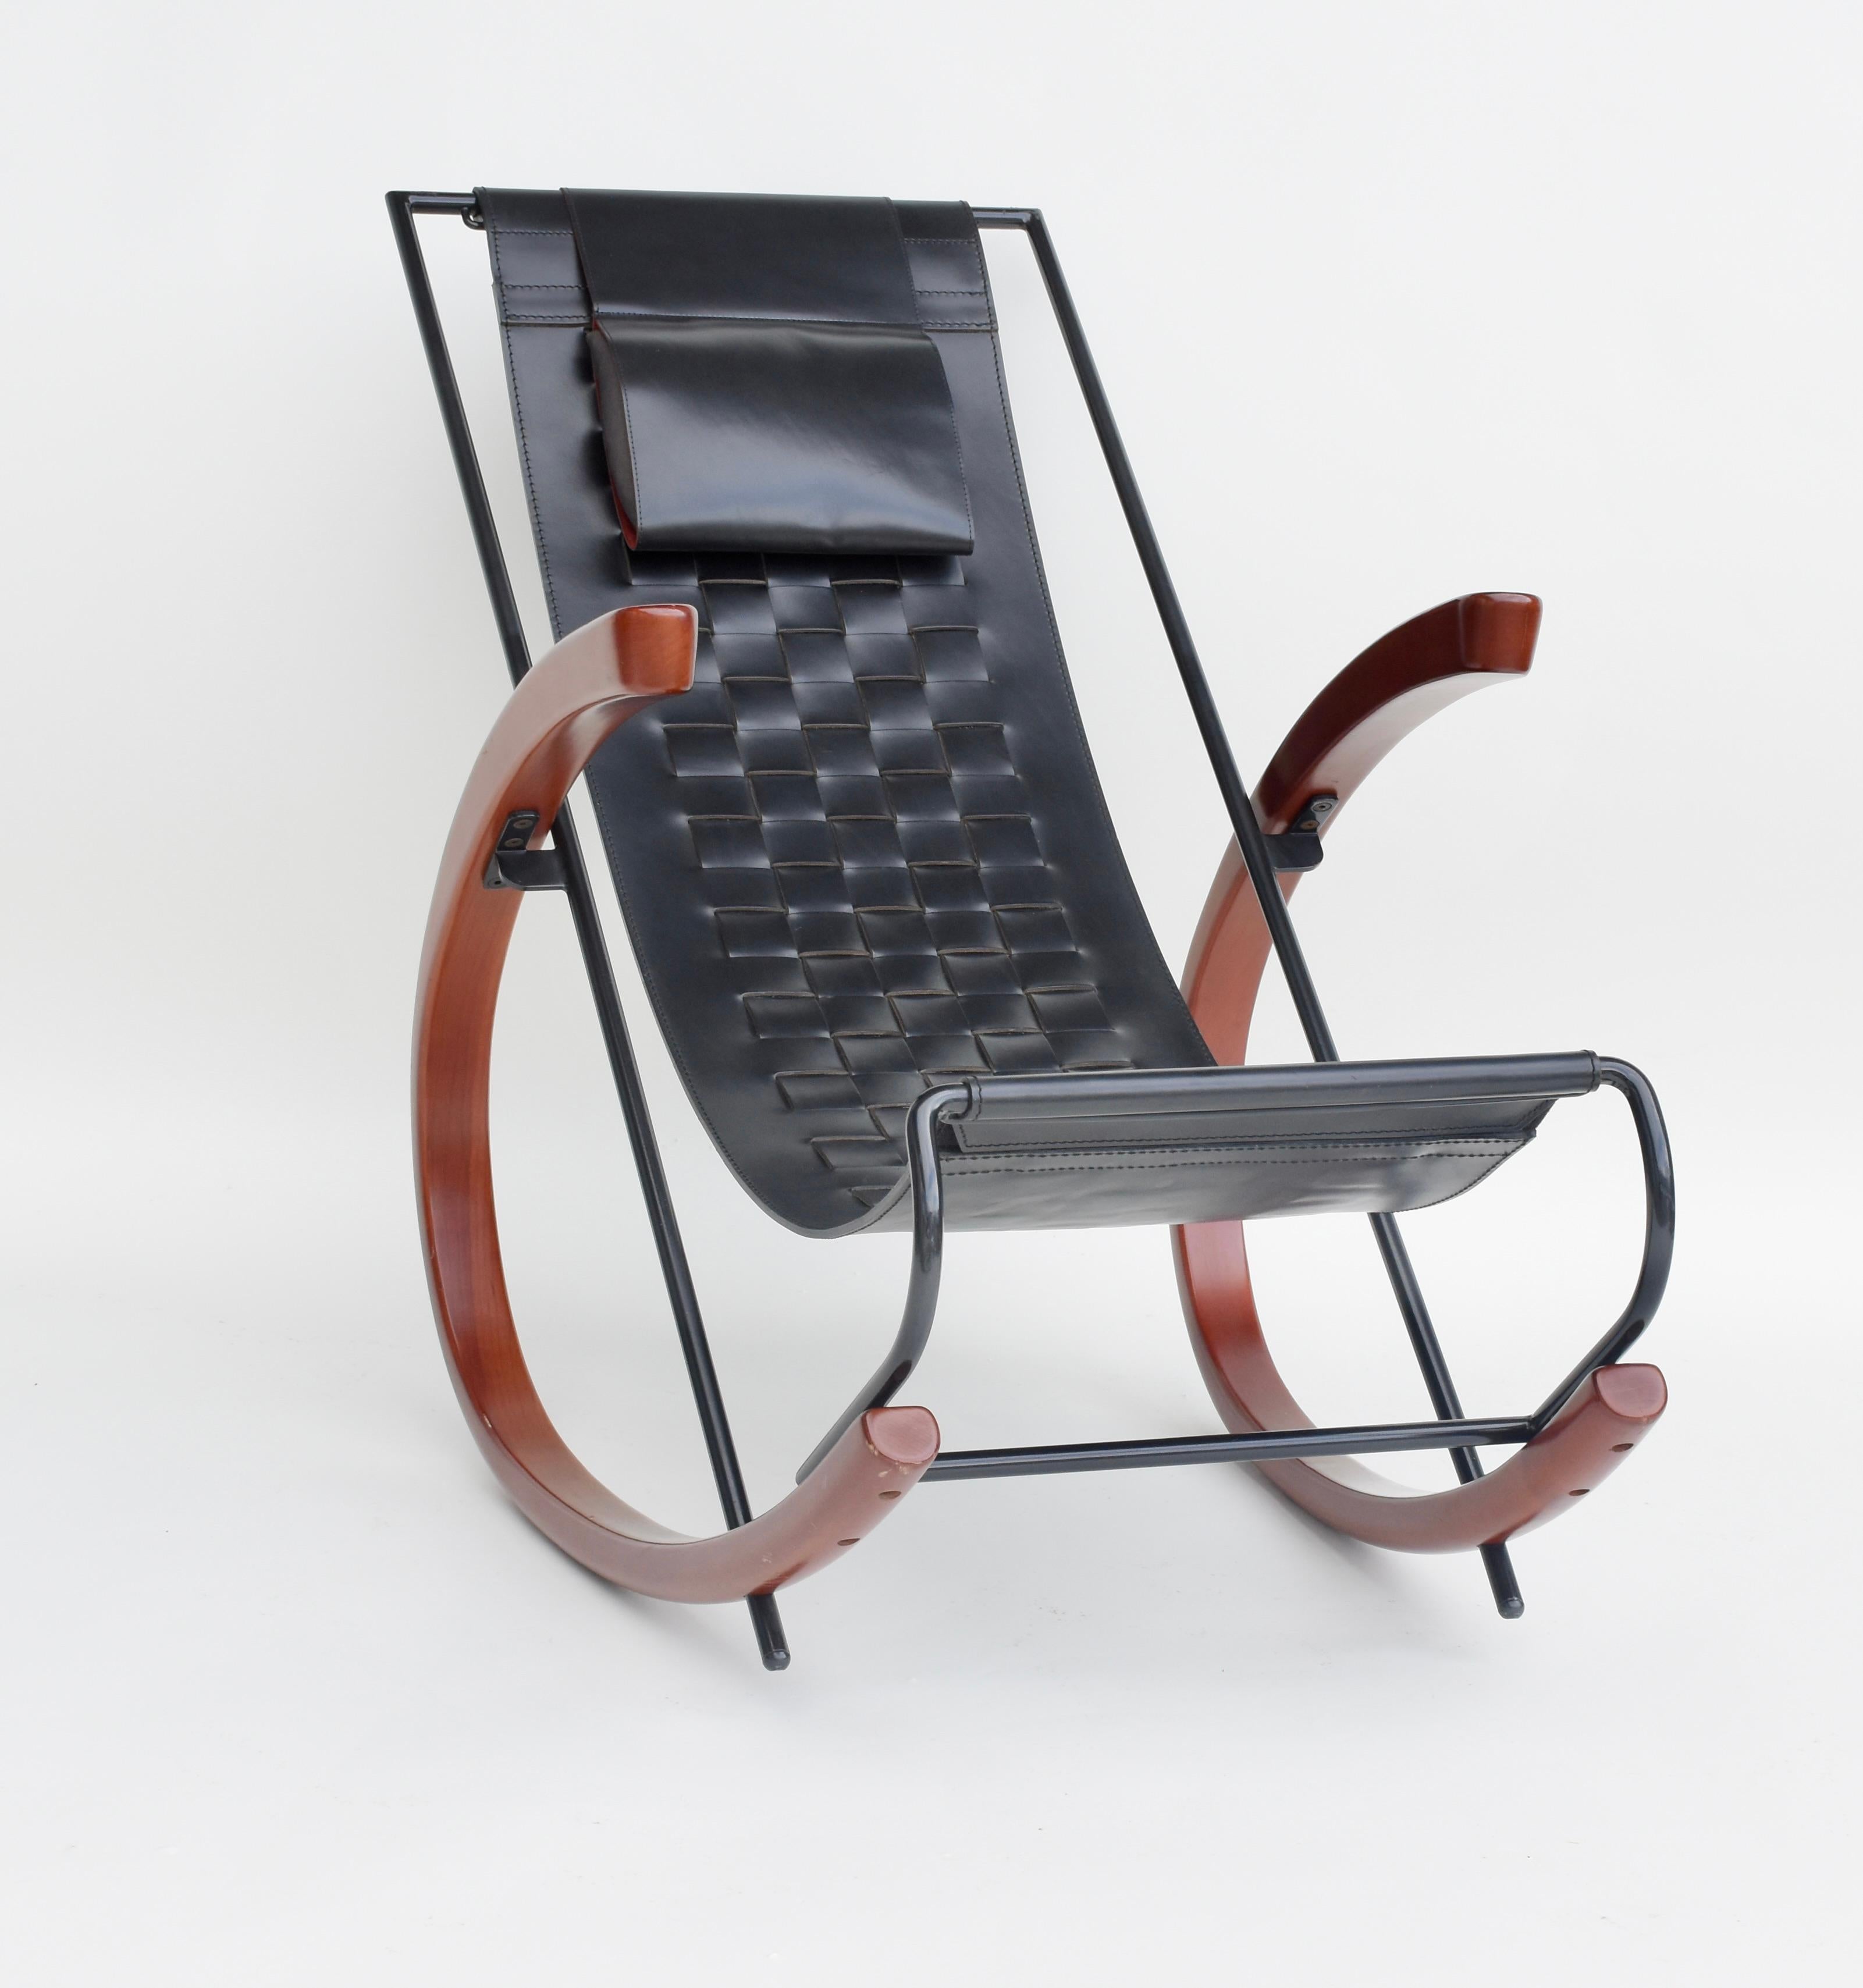 Black leather rocking chair model 'Donna' by Elio di Franco for Zanotta - 1988.
The condition of the chair is very good. Leather looks beautiful and good frame has great shine and form. 
Feel free to request a delivery rate and we will do our best